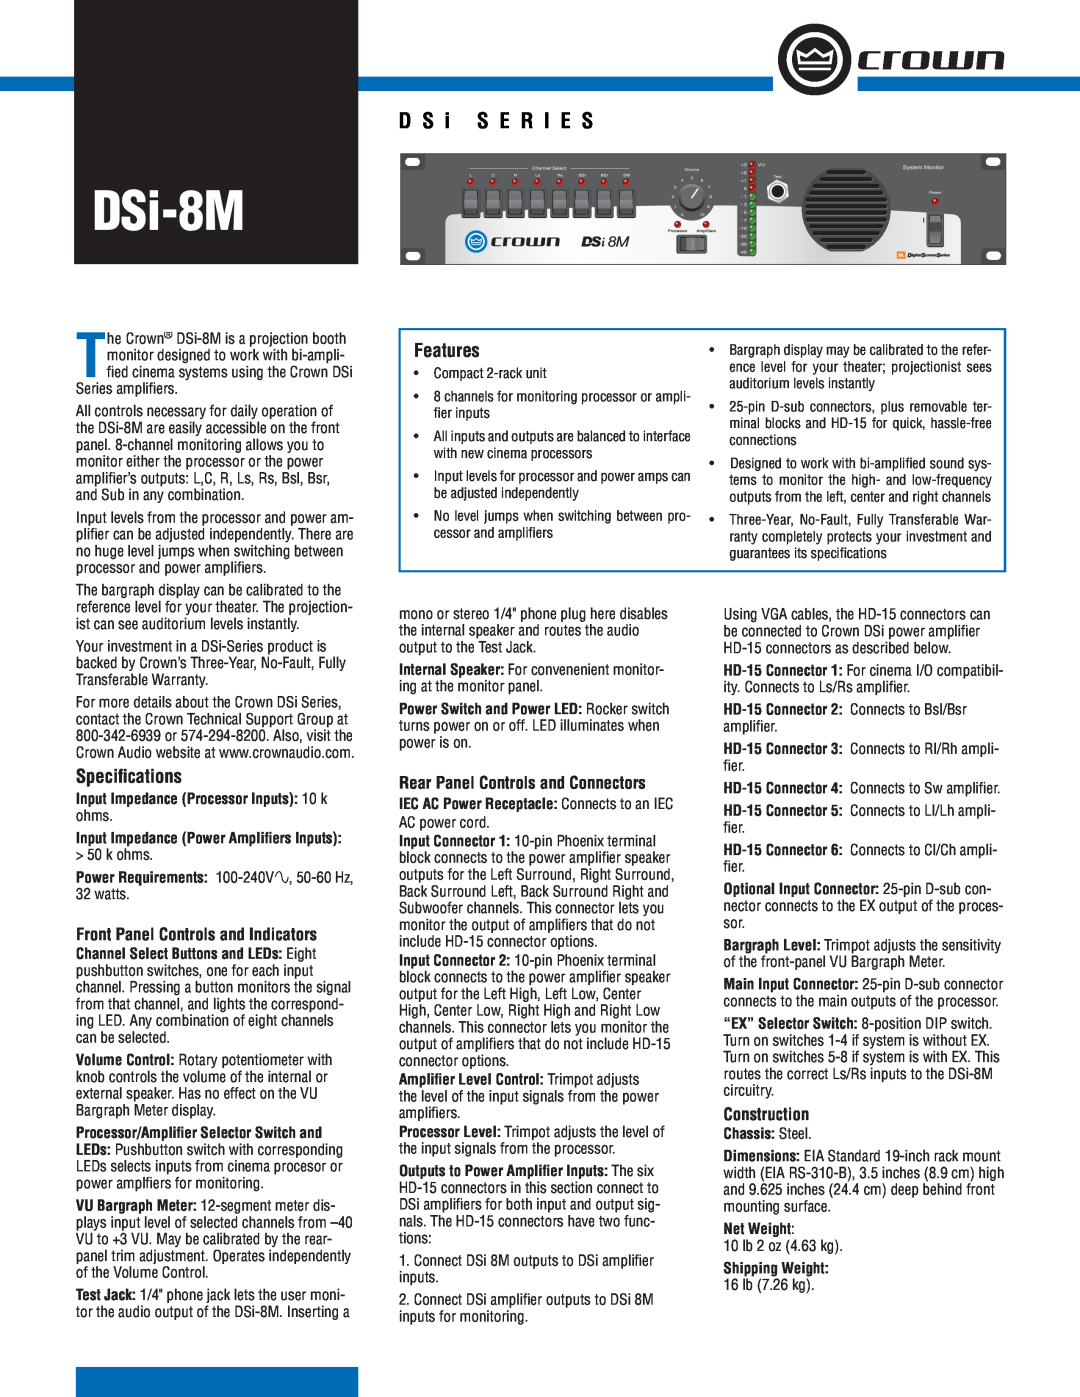 Crown Audio DSi-8M specifications Features, Speciﬁcations, Front Panel Controls and Indicators, Construction 